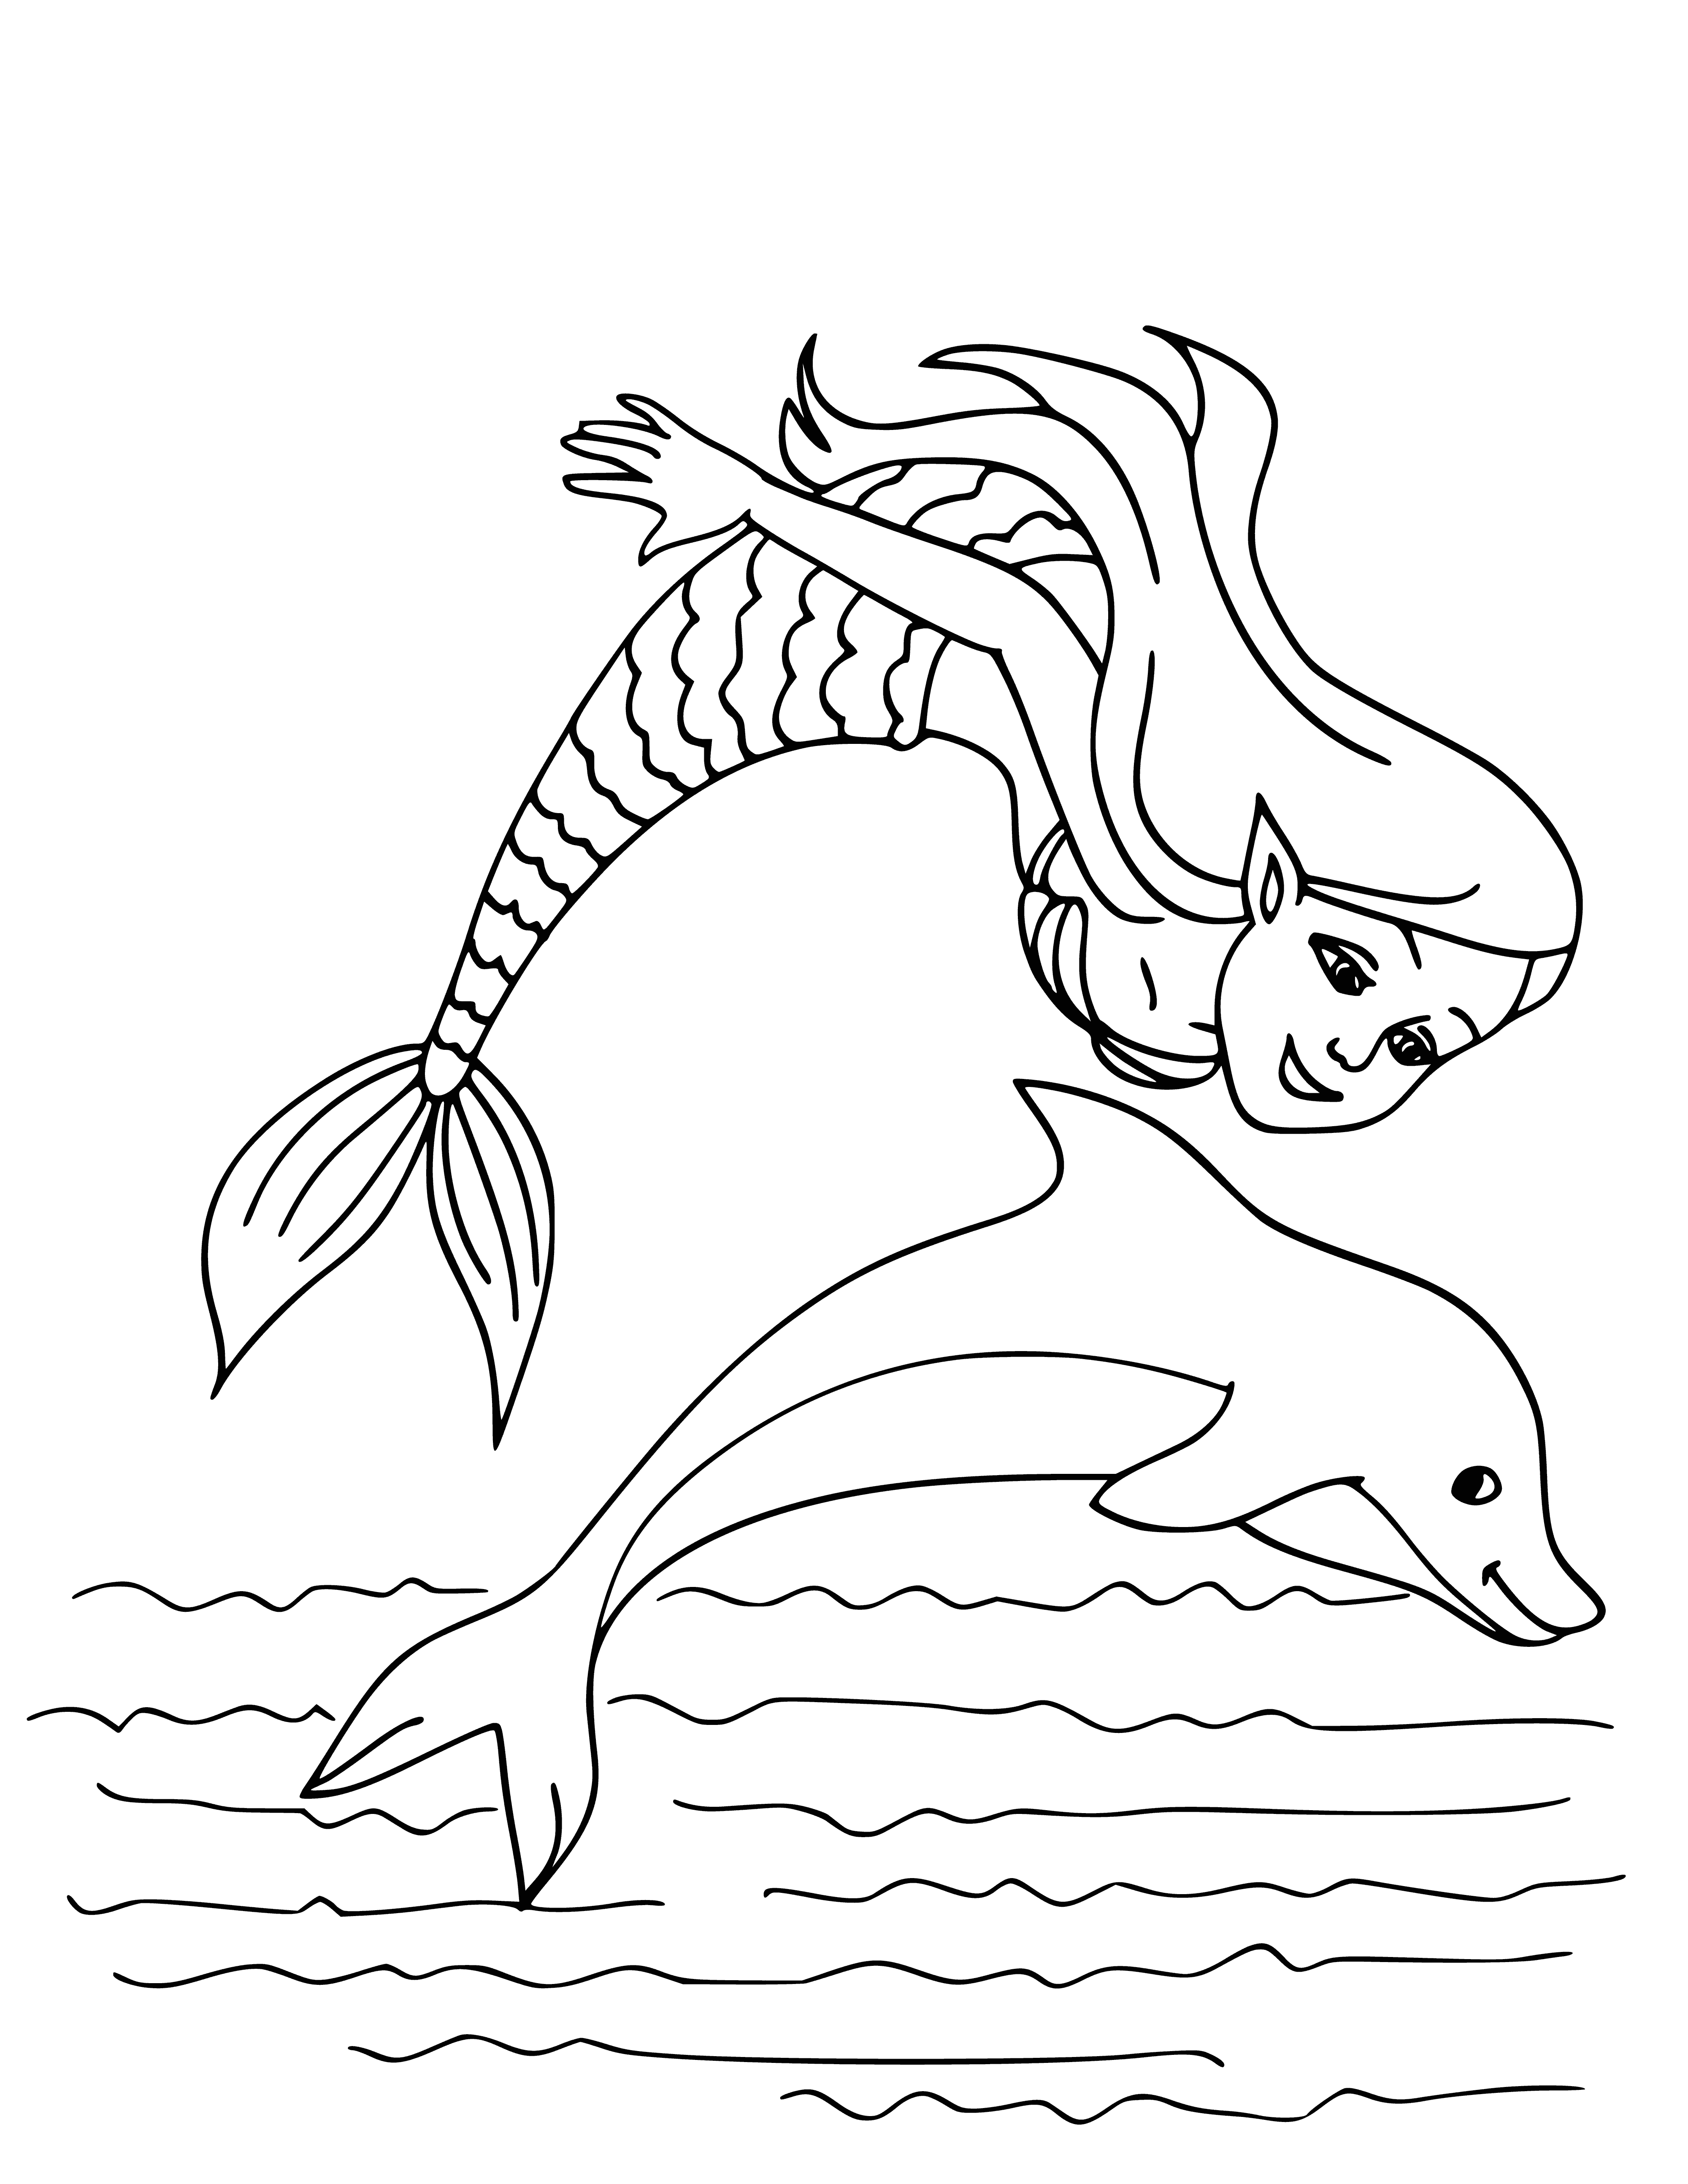 coloring page: Mermaids & dolphins swim & play together; all appear happy & enjoying each other.